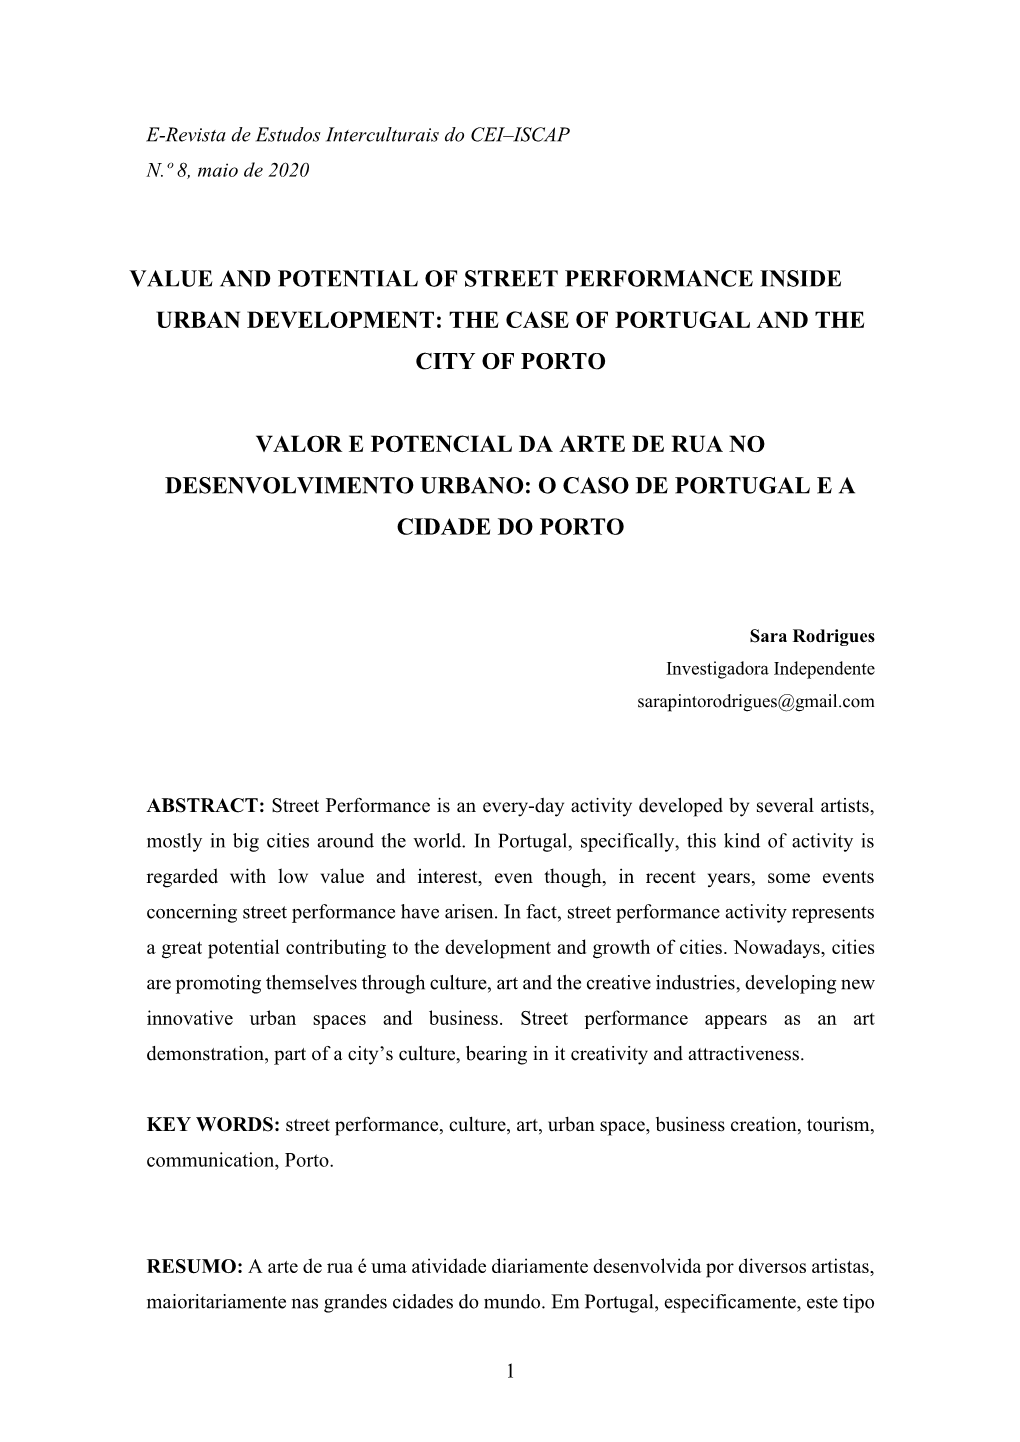 Value and Potential of Street Performance Inside Urban Development: the Case of Portugal and the City of Porto